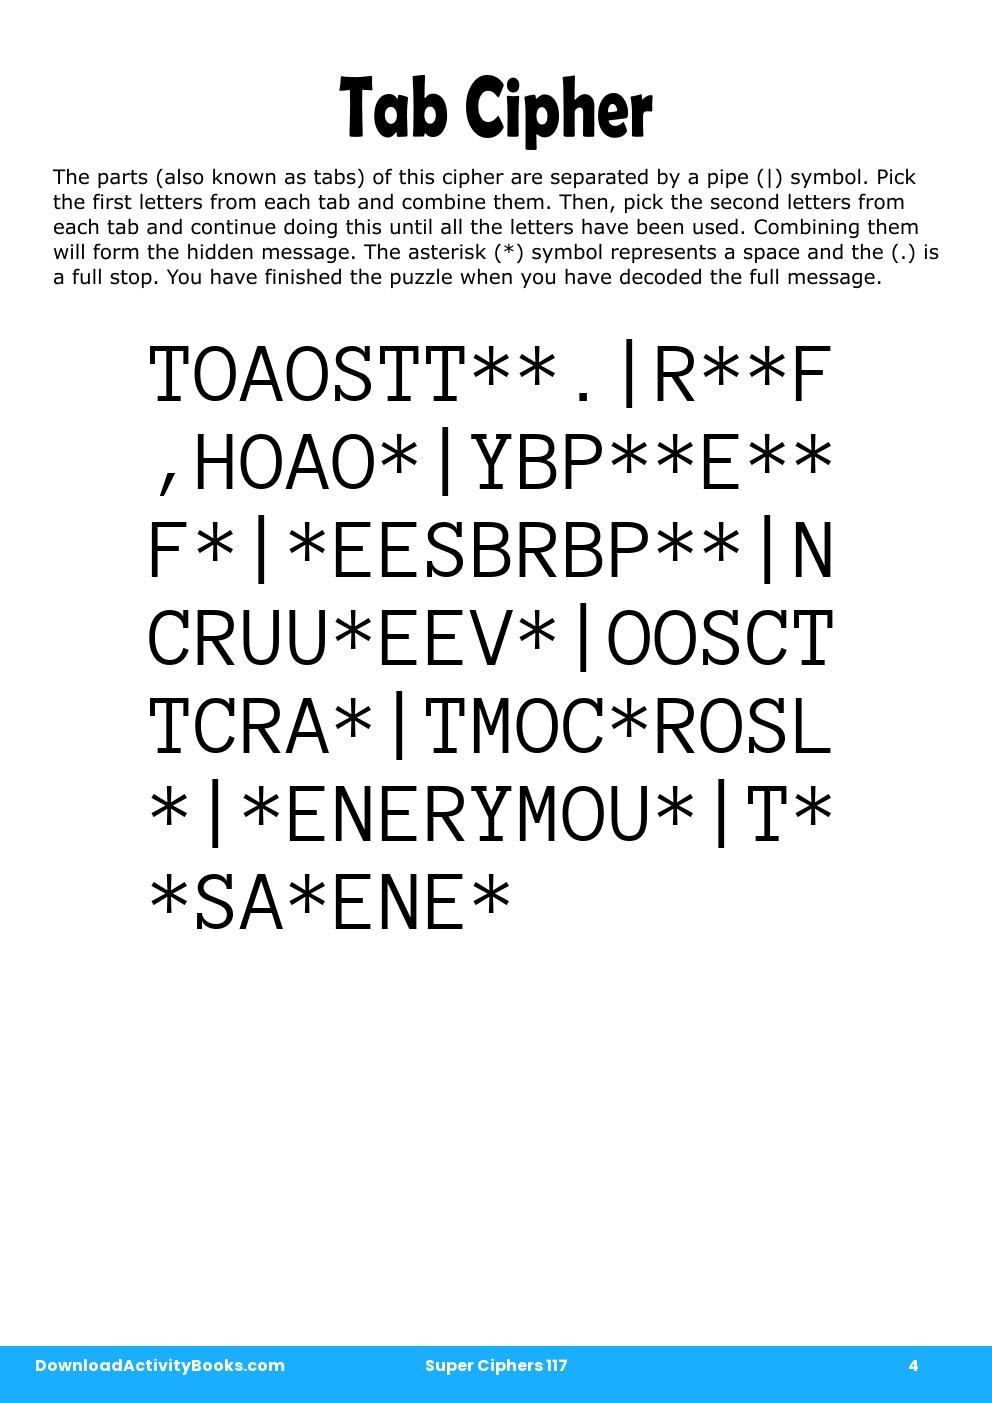 Tab Cipher in Super Ciphers 117